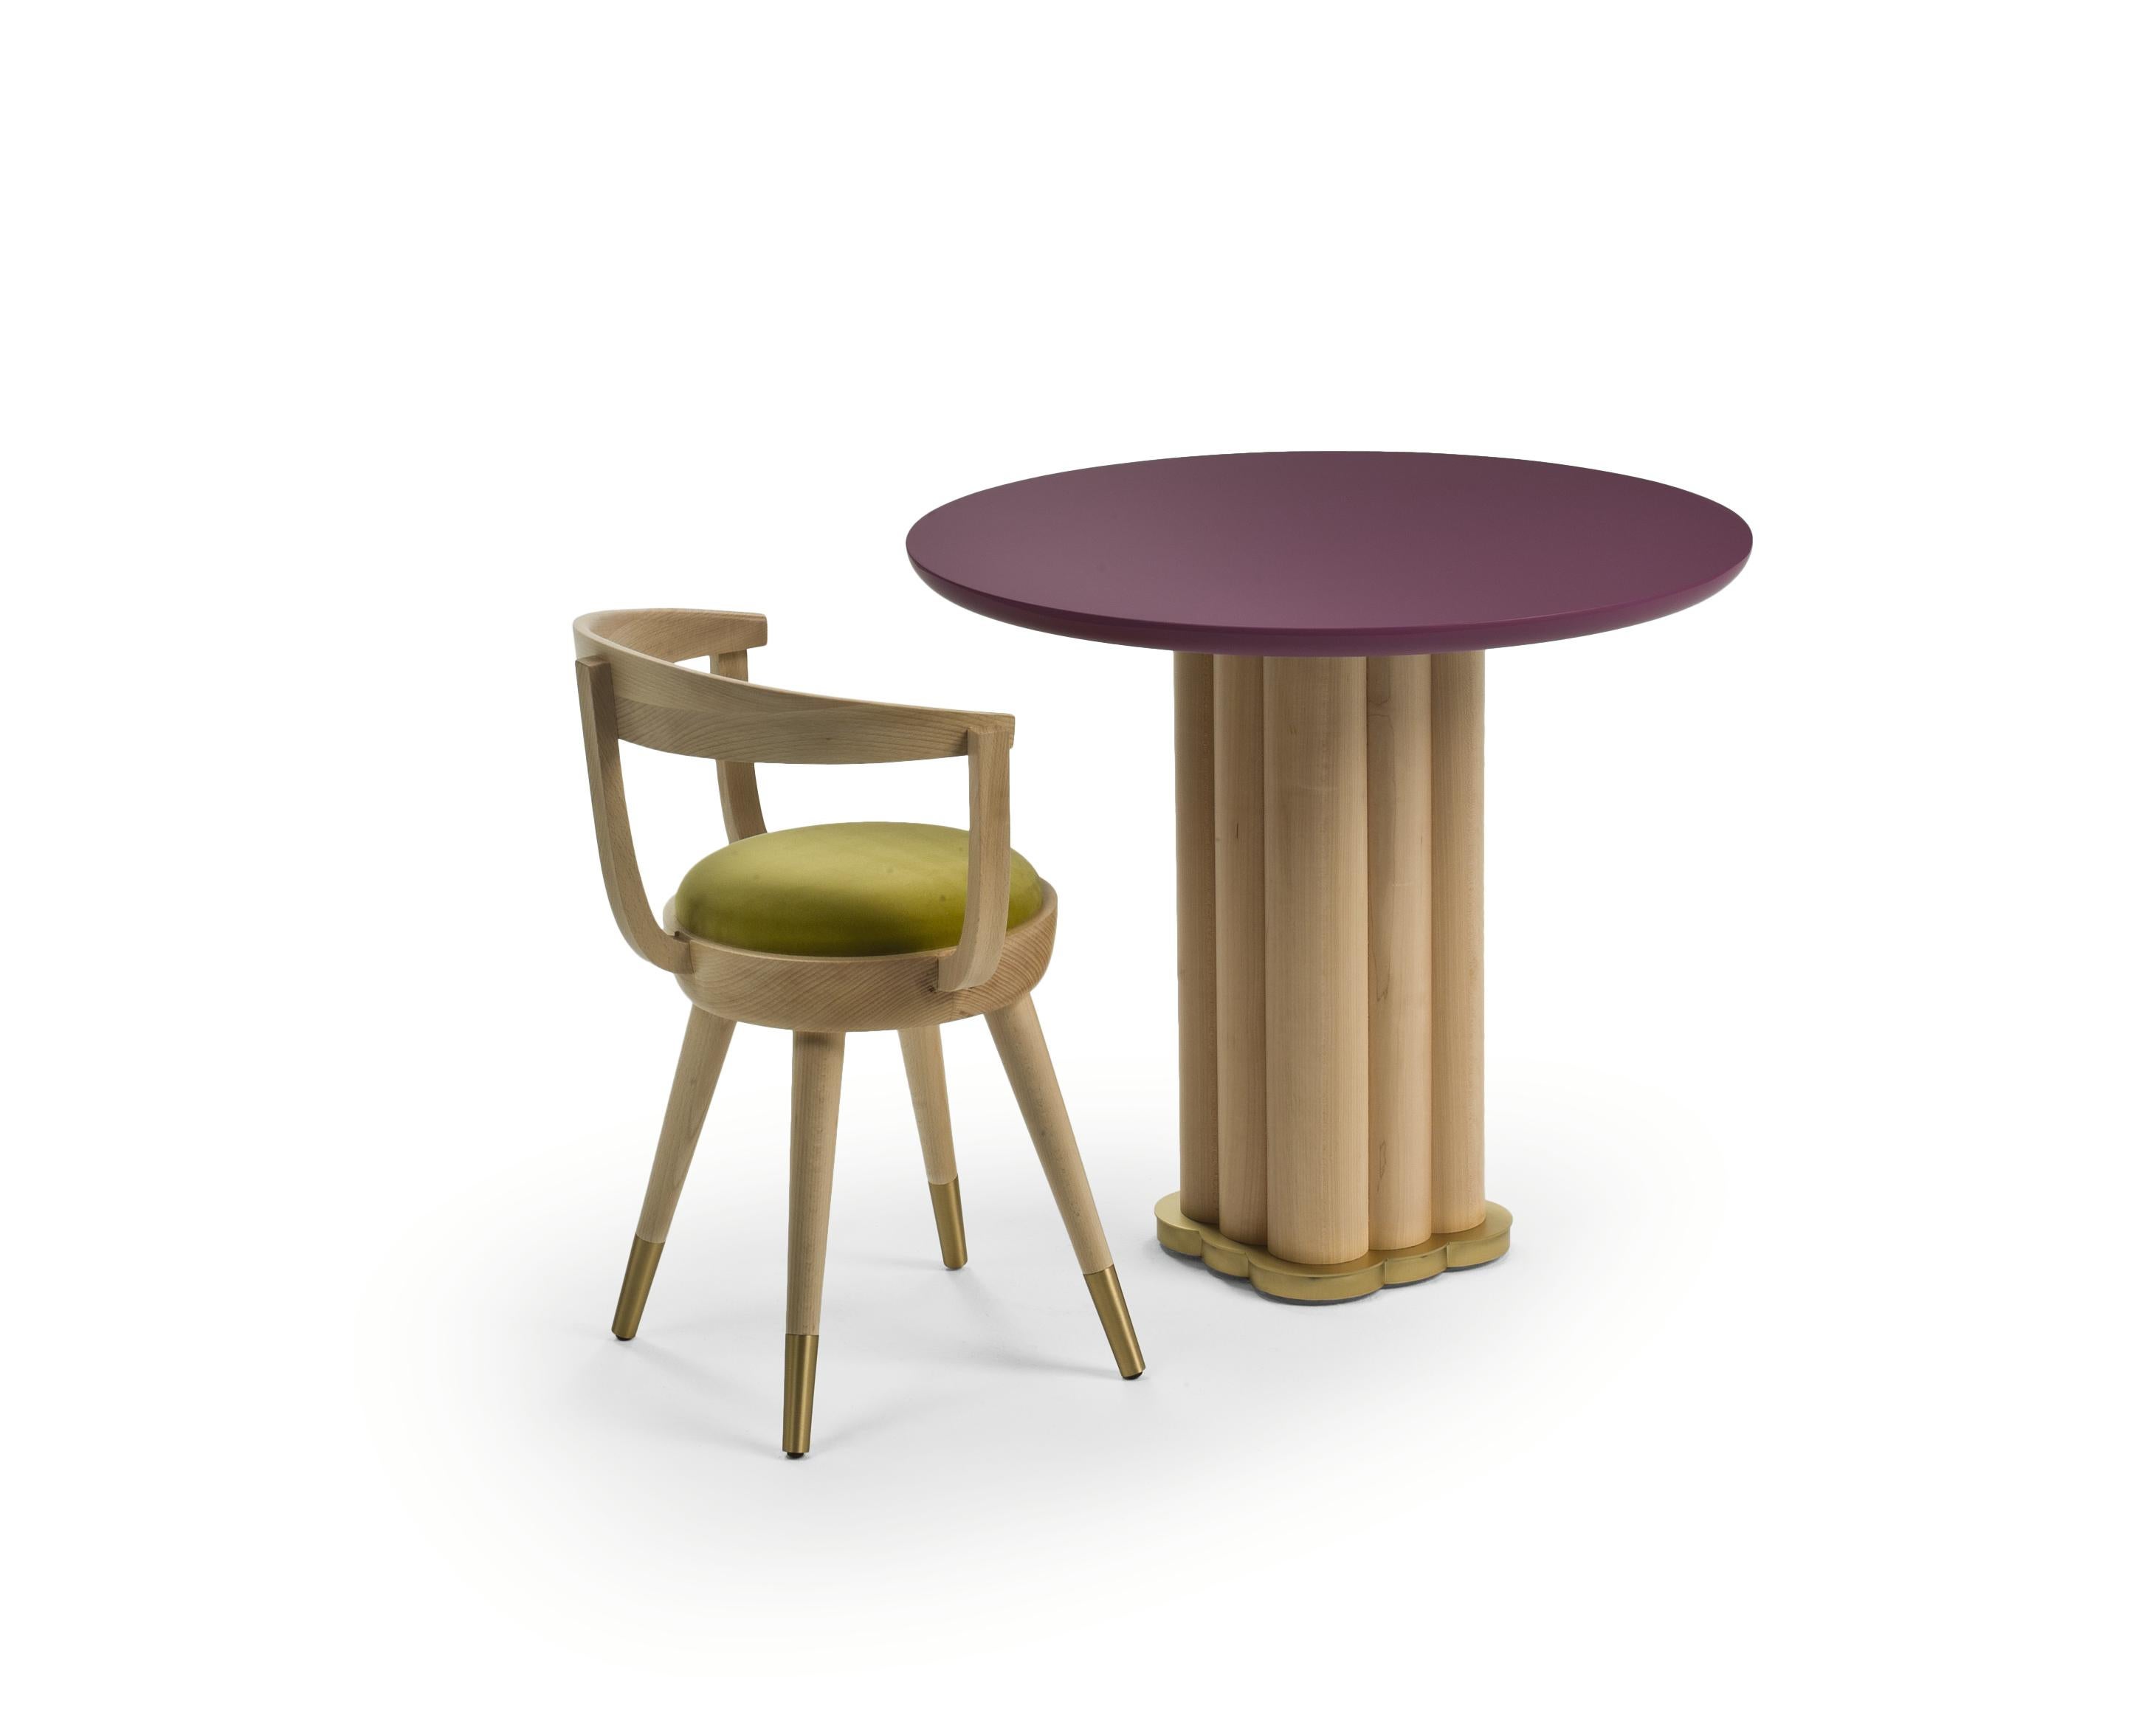 This exquisite table seamlessly blends contrasting elements to create a visual masterpiece that commands attention in any space.

The focal point of Flo is its central leg, meticulously crafted from maple wood. This natural essence serves as the